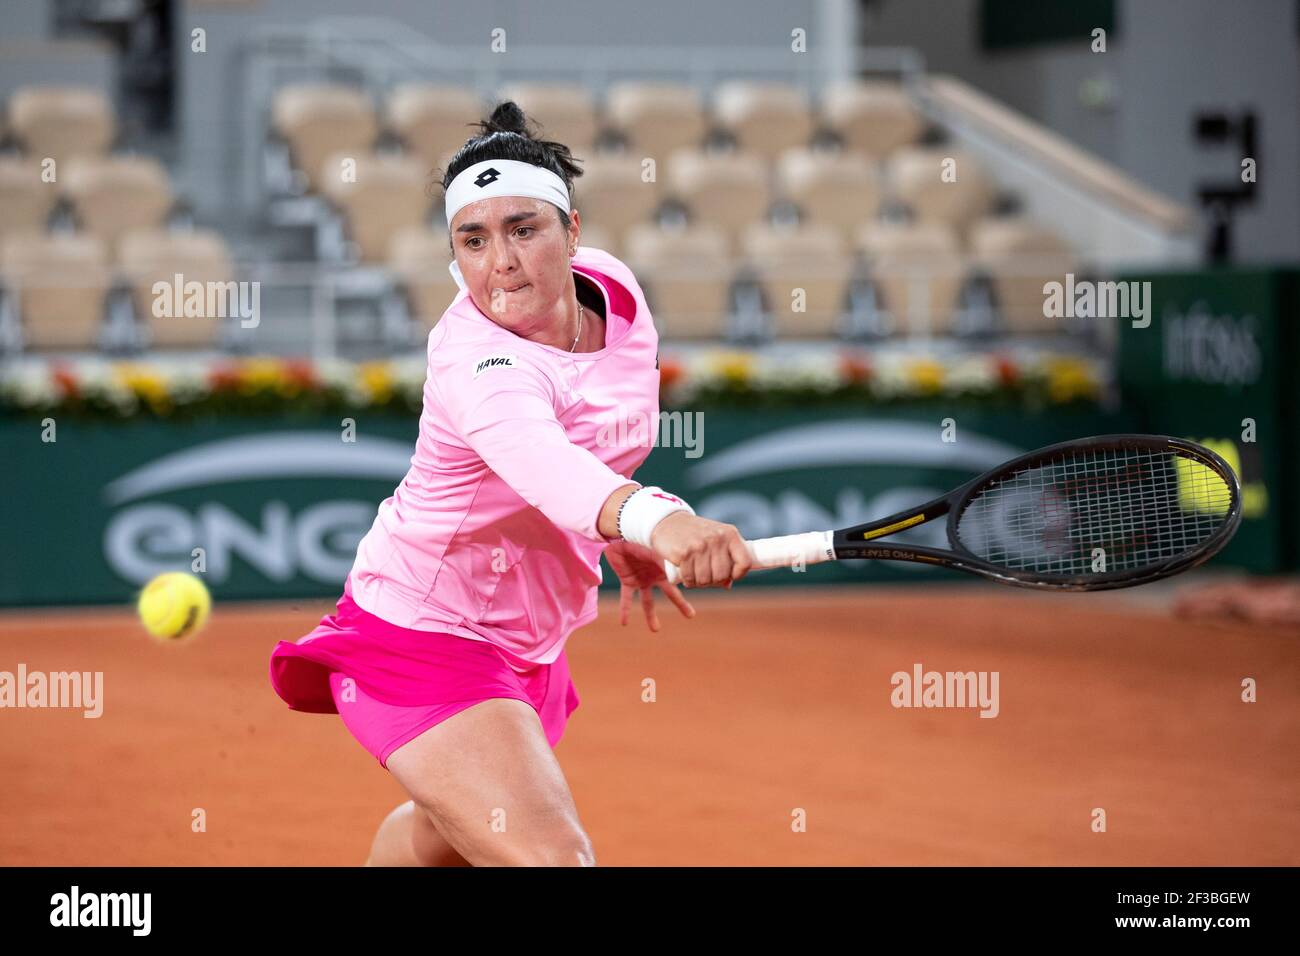 Tunesian tennis player Ons Jabeur playing a backhand shot during French Open 2020, Paris, France, Europe. Stock Photo